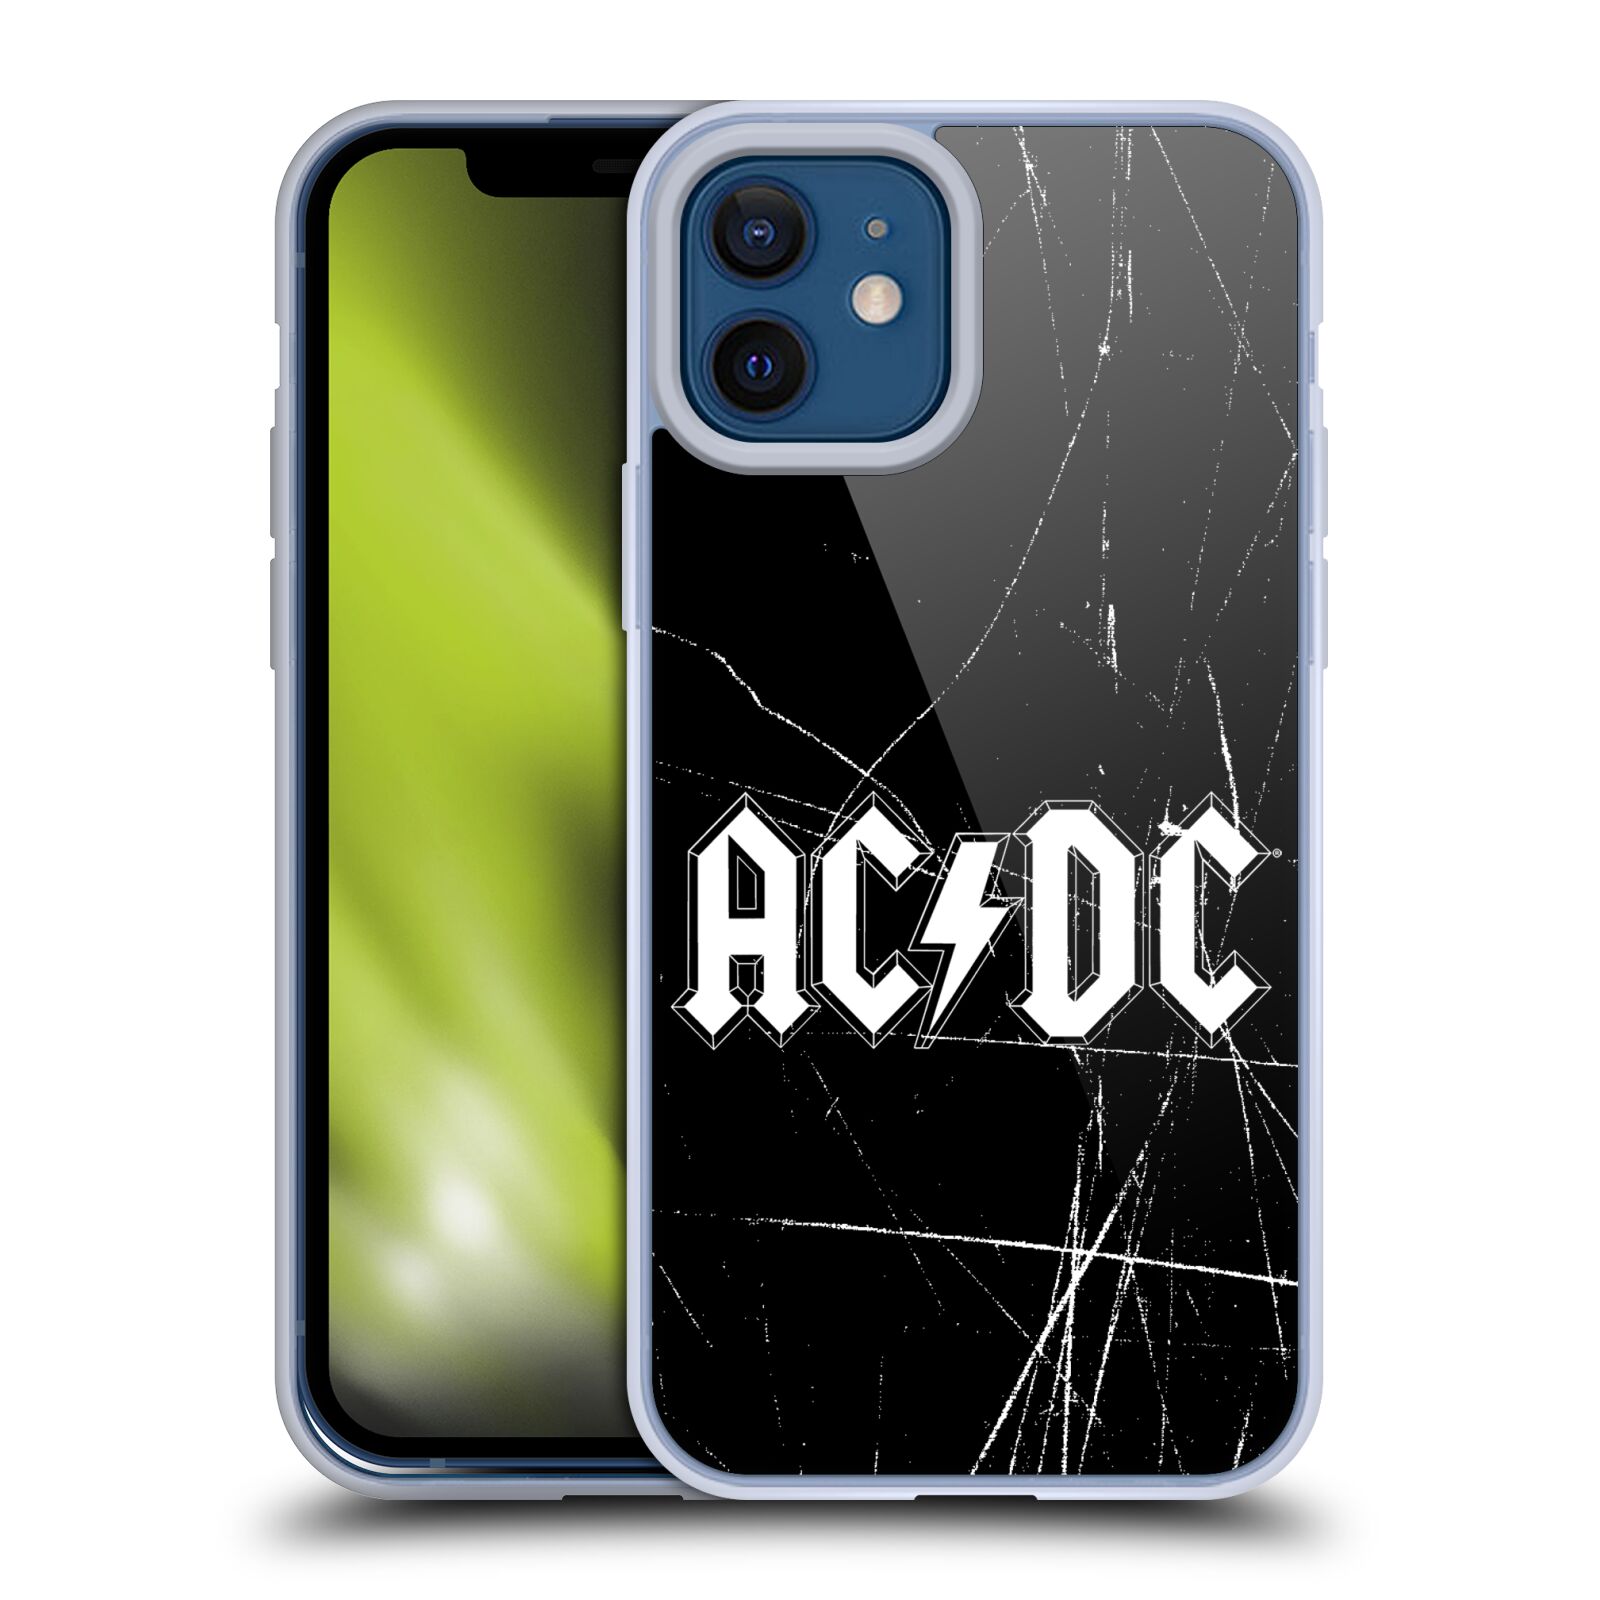 likely compact pretend OFFICIAL AC/DC ACDC LOGO SOFT GEL CASE FOR APPLE iPHONE PHONES | eBay